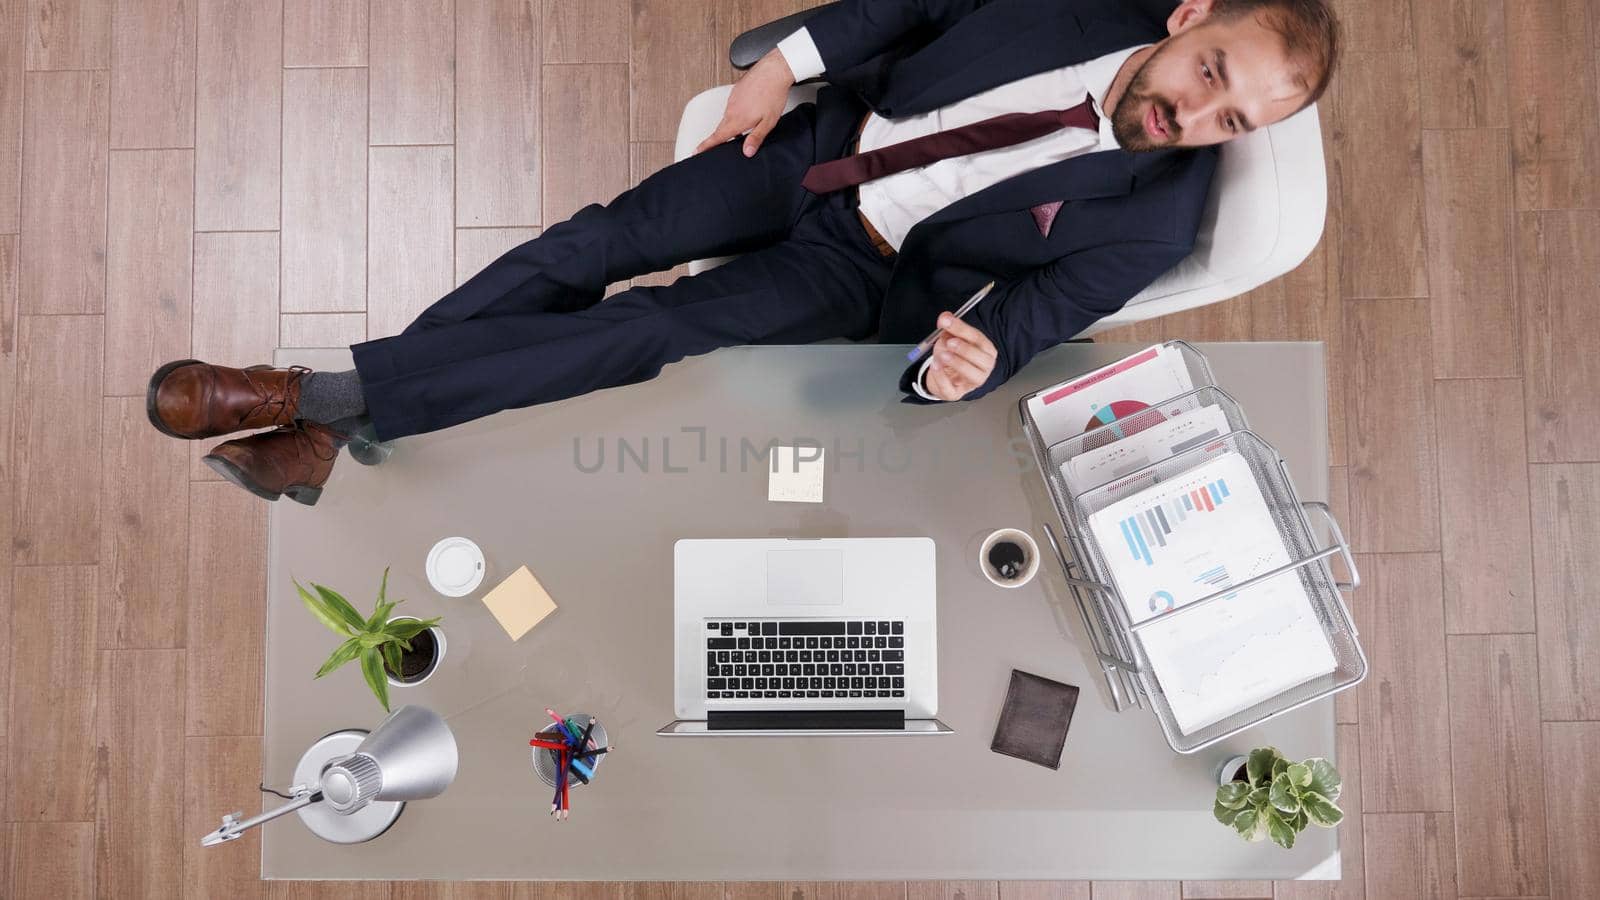 Top view of successful businessman in suit standing with his feet on the desk by DCStudio